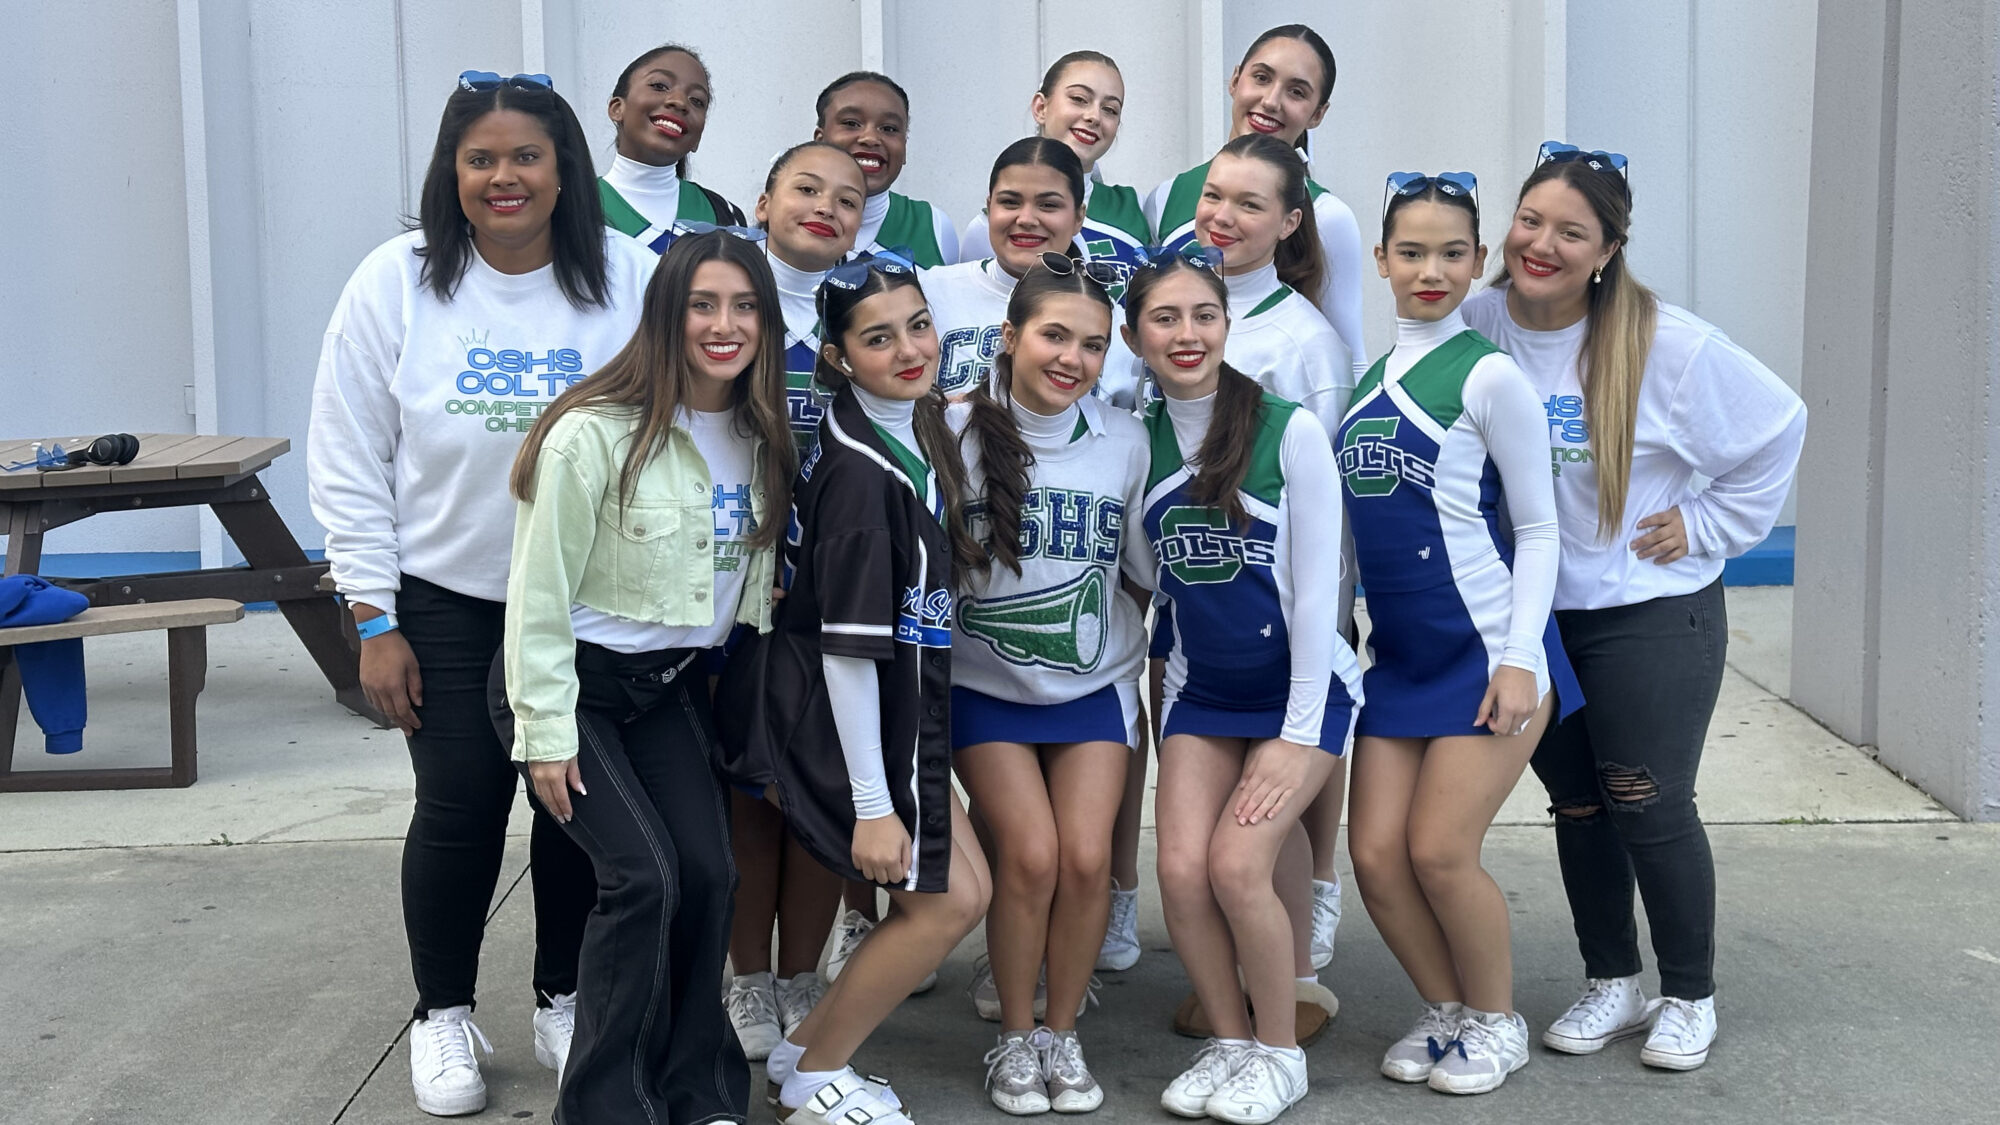 Coral Springs High School Cheerleading Finishes 11th in States